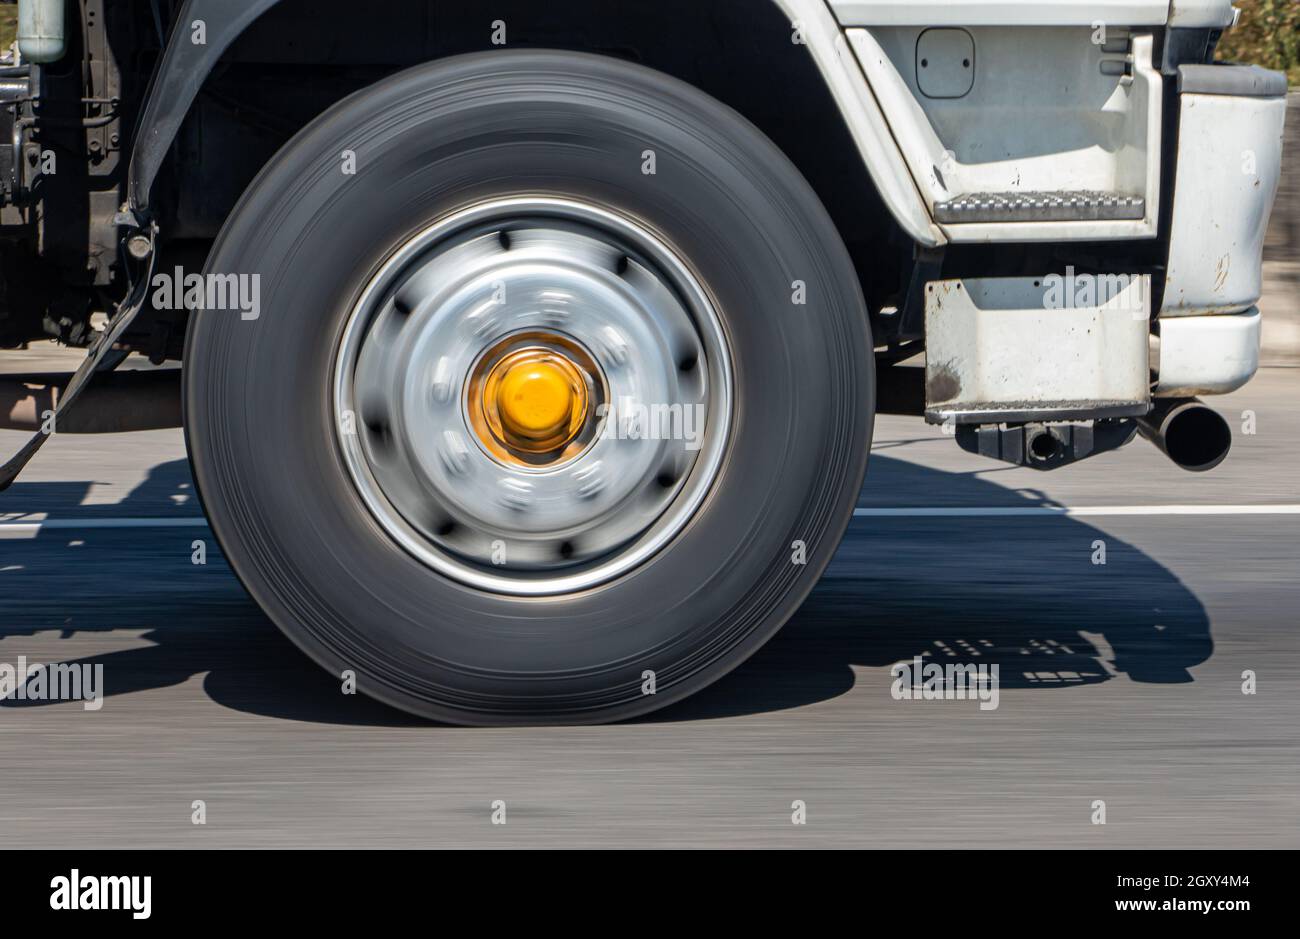 A spinning wheel of a truck running on the road. Detail of a rotating wheel of a truck rides on the highway. Stock Photo